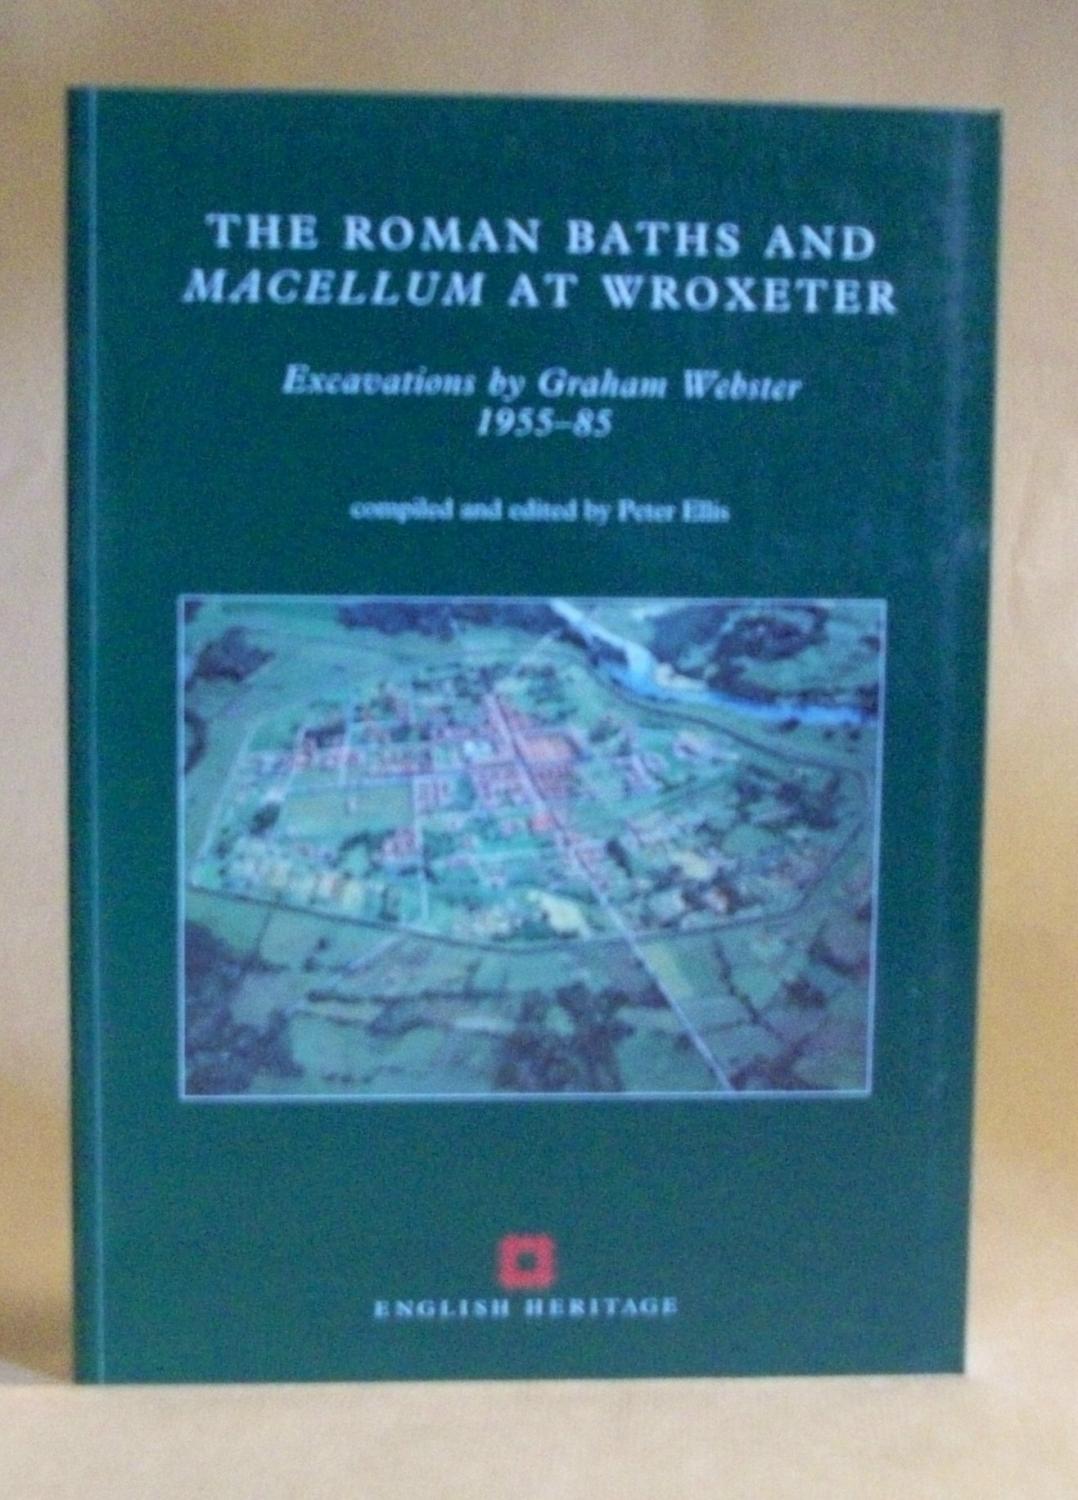 The Roman Baths and Macellum at Wroxeter. Excavations by Graham Webster ...